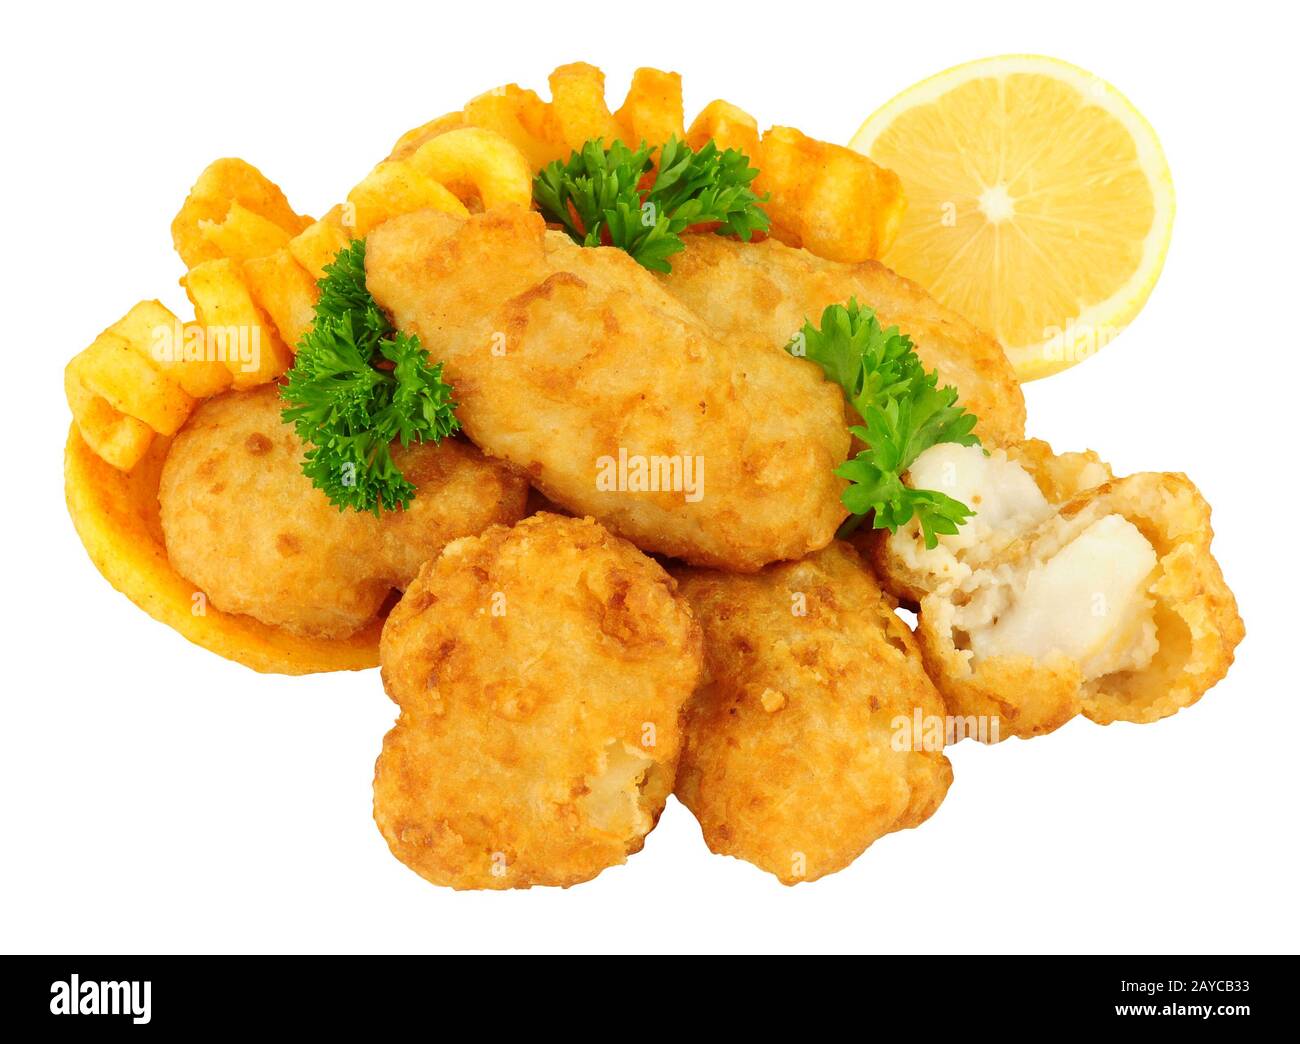 Battered cod fish nugget bites with curly fries isolated on a